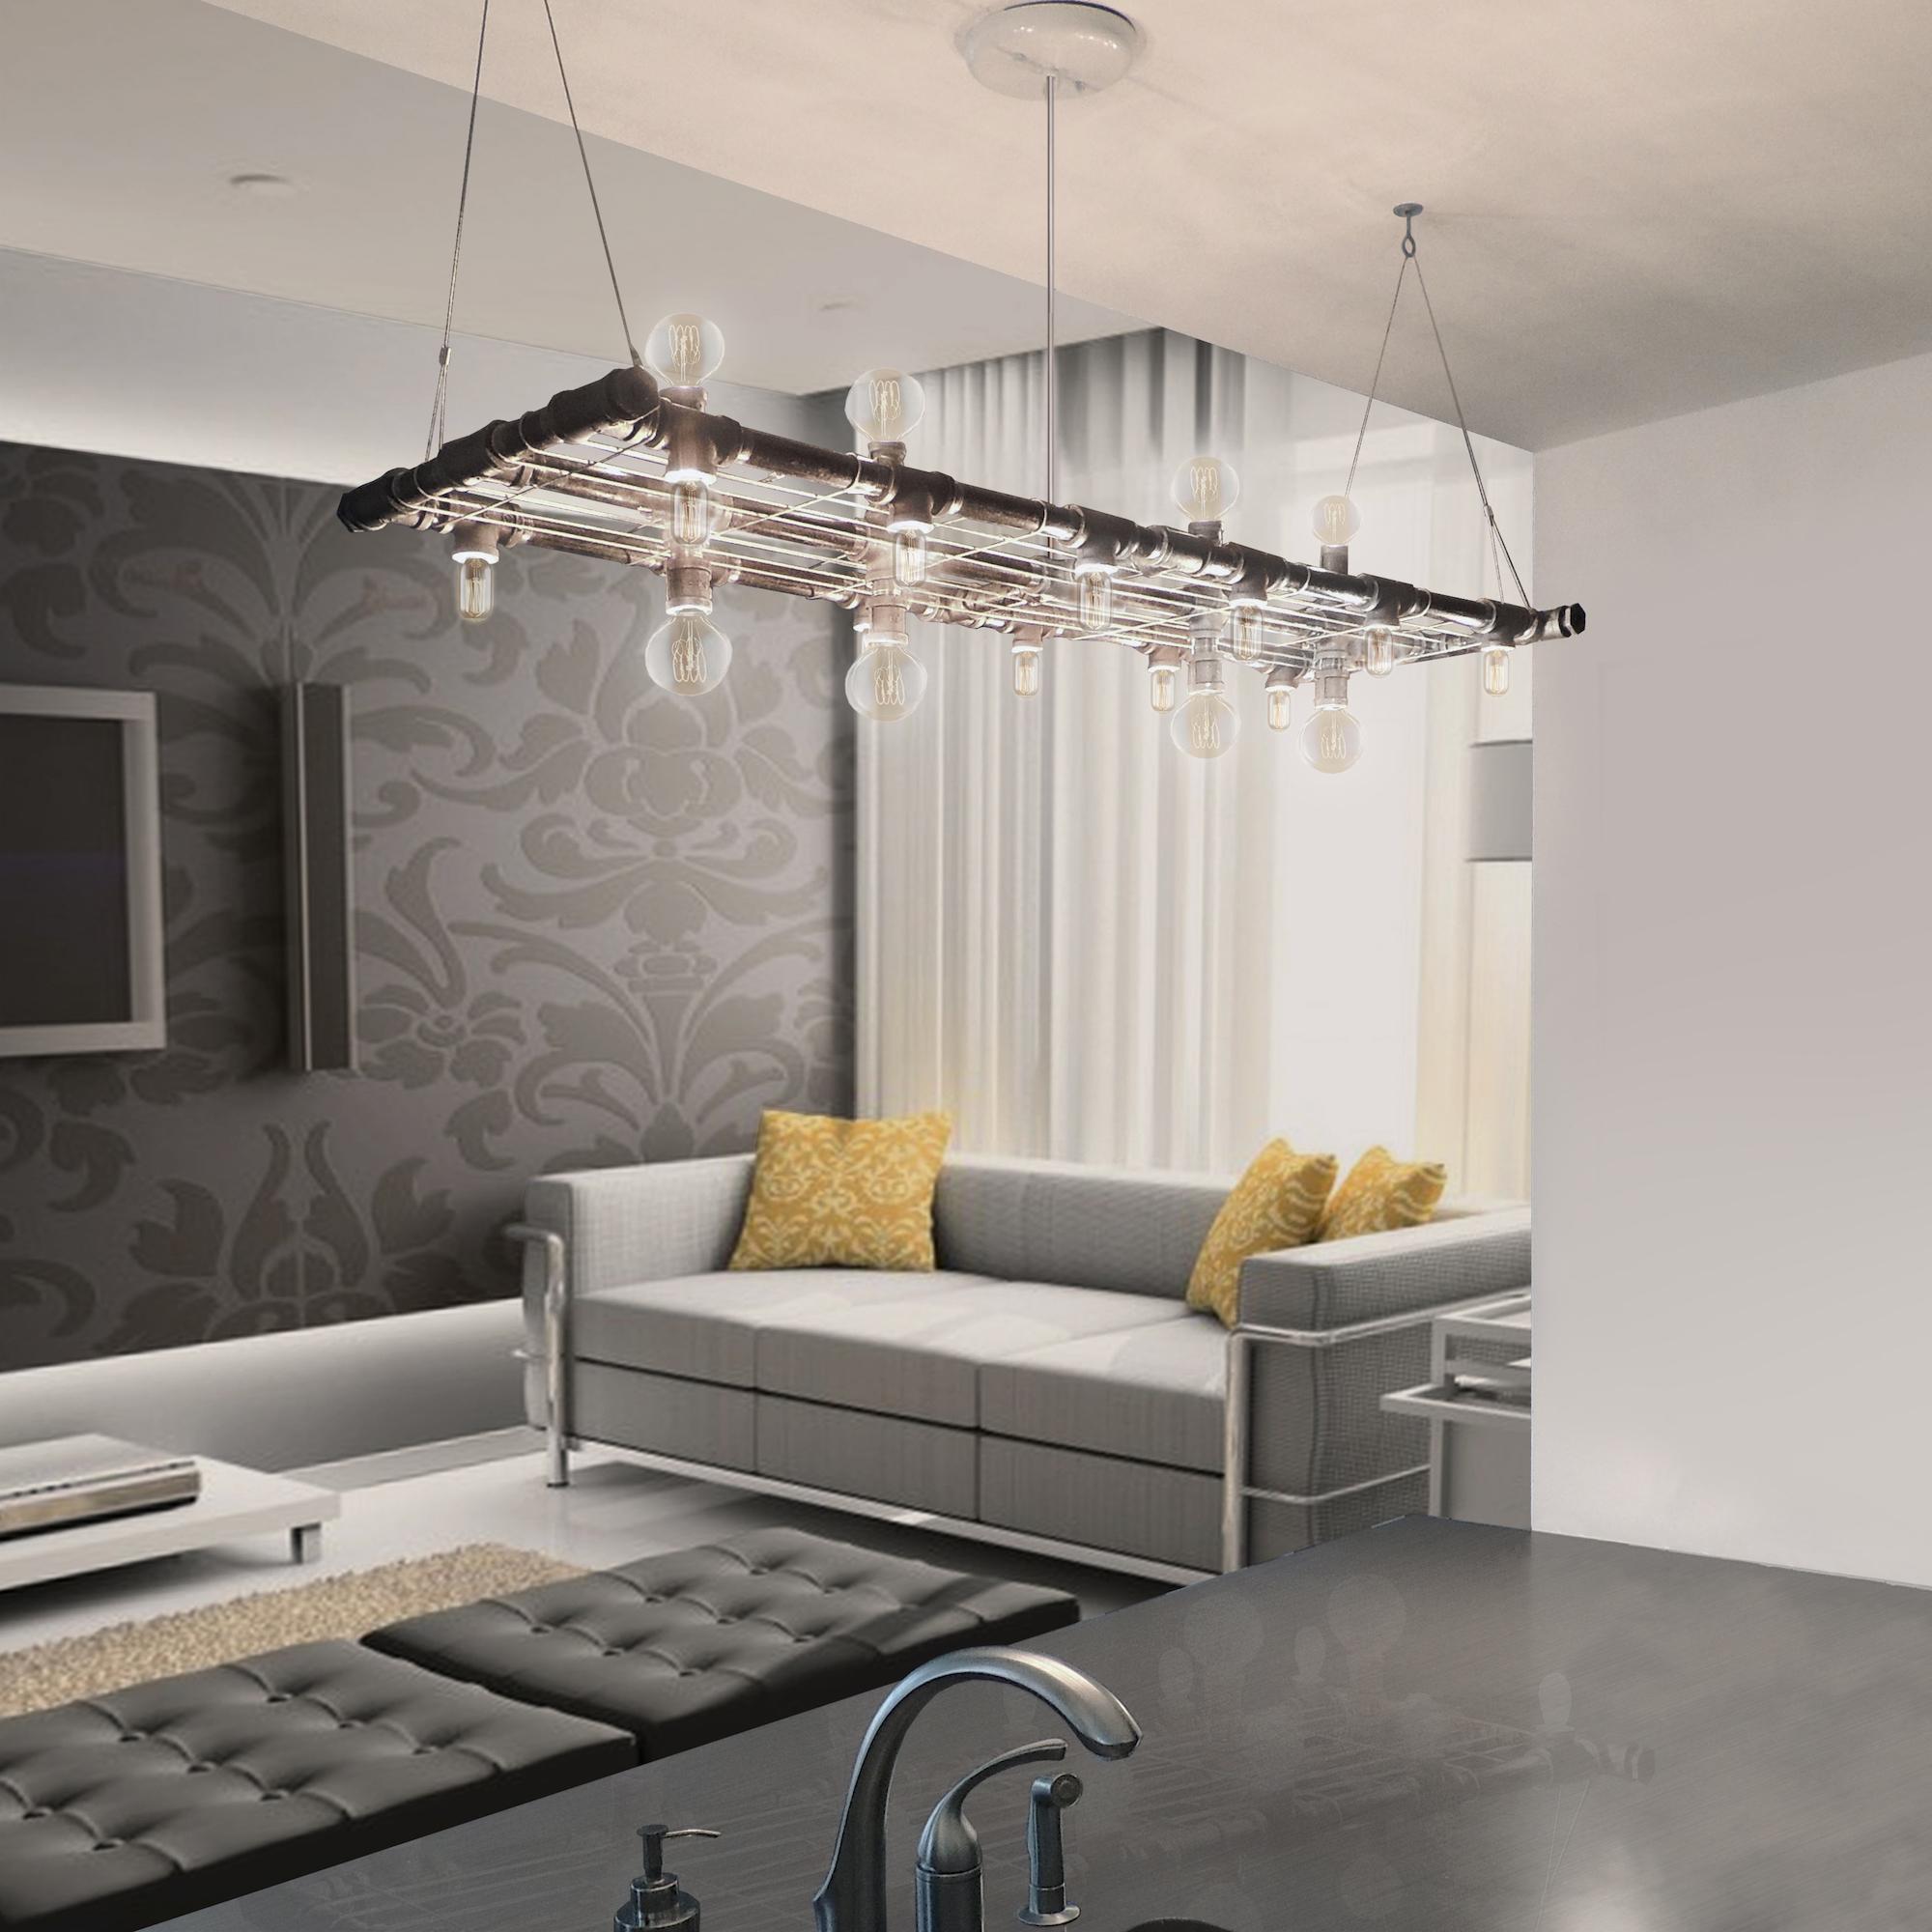 If you are prefer Industrial to glam, this is the fixture for you. The rectangular raw banqueting linear suspension is a dramatically masculine expression of simplicity, taste, and confidence. With 16 sockets, you'll have both uplighting and